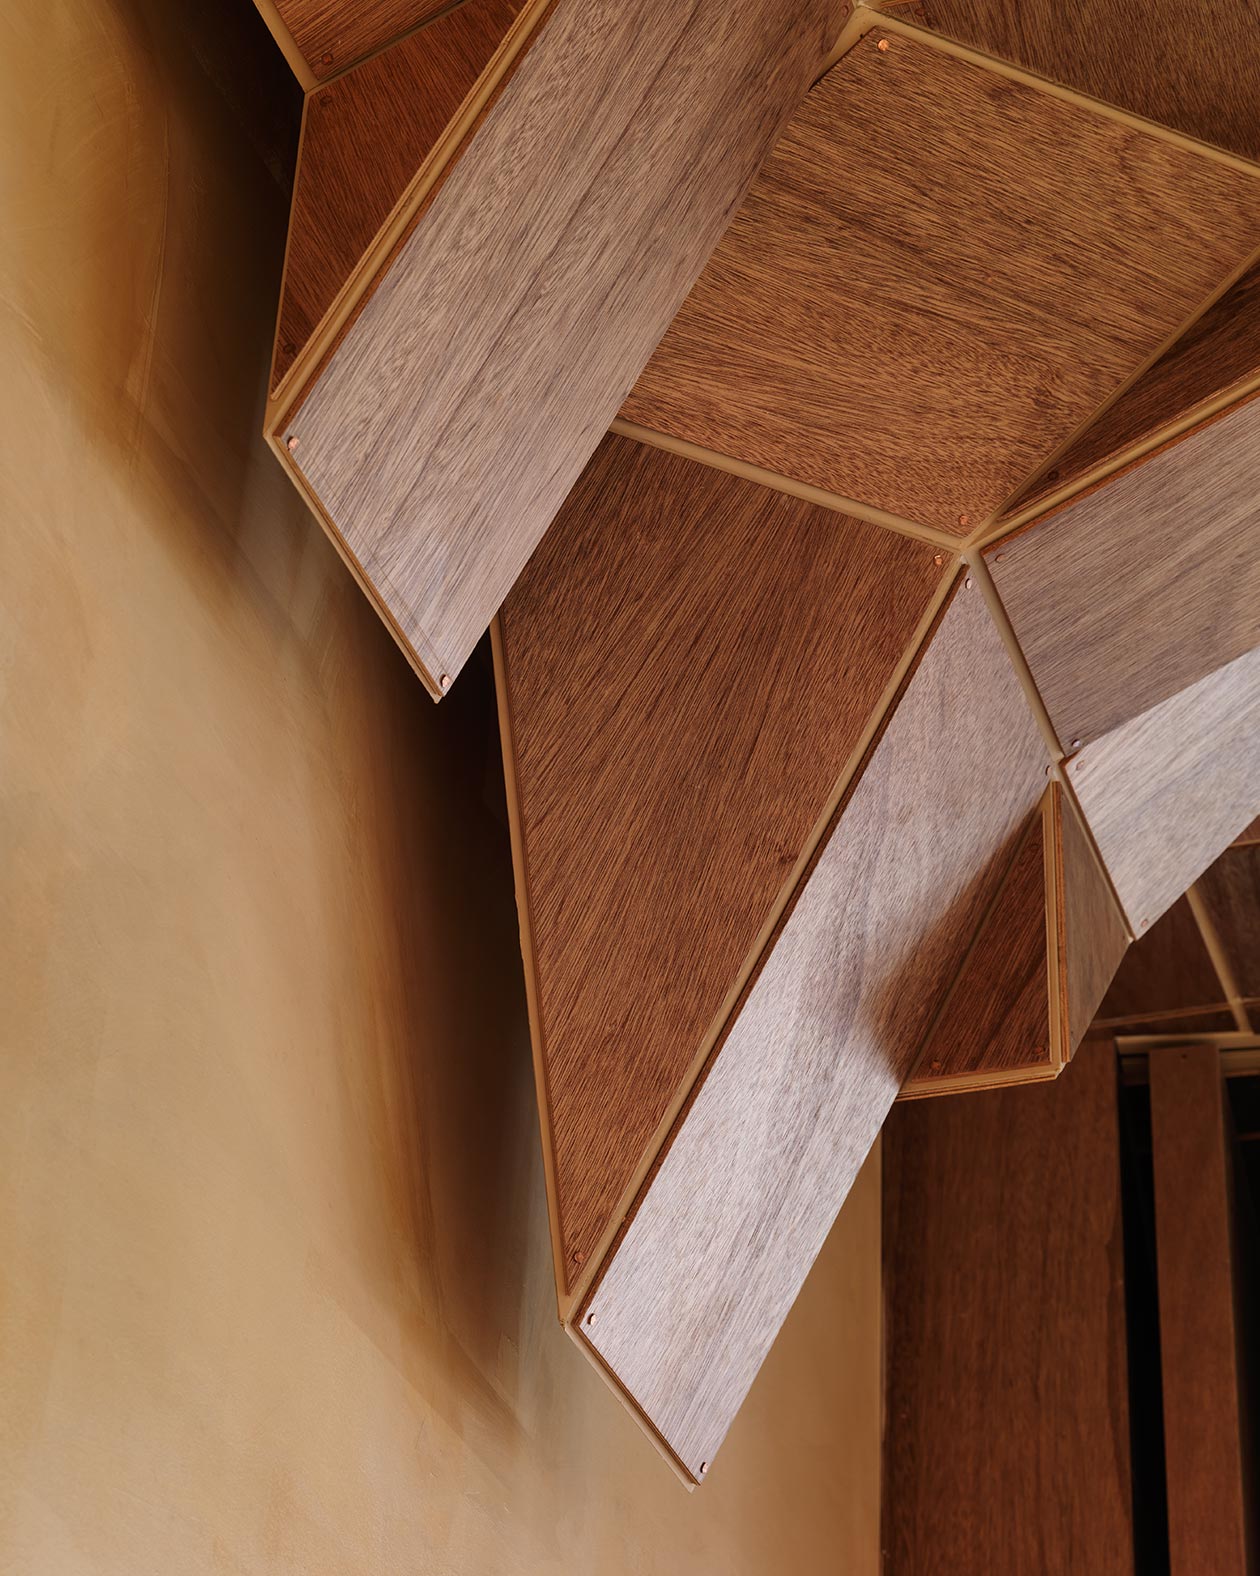 A close-up of the angular ceiling structure, crafted out of dark plywood.